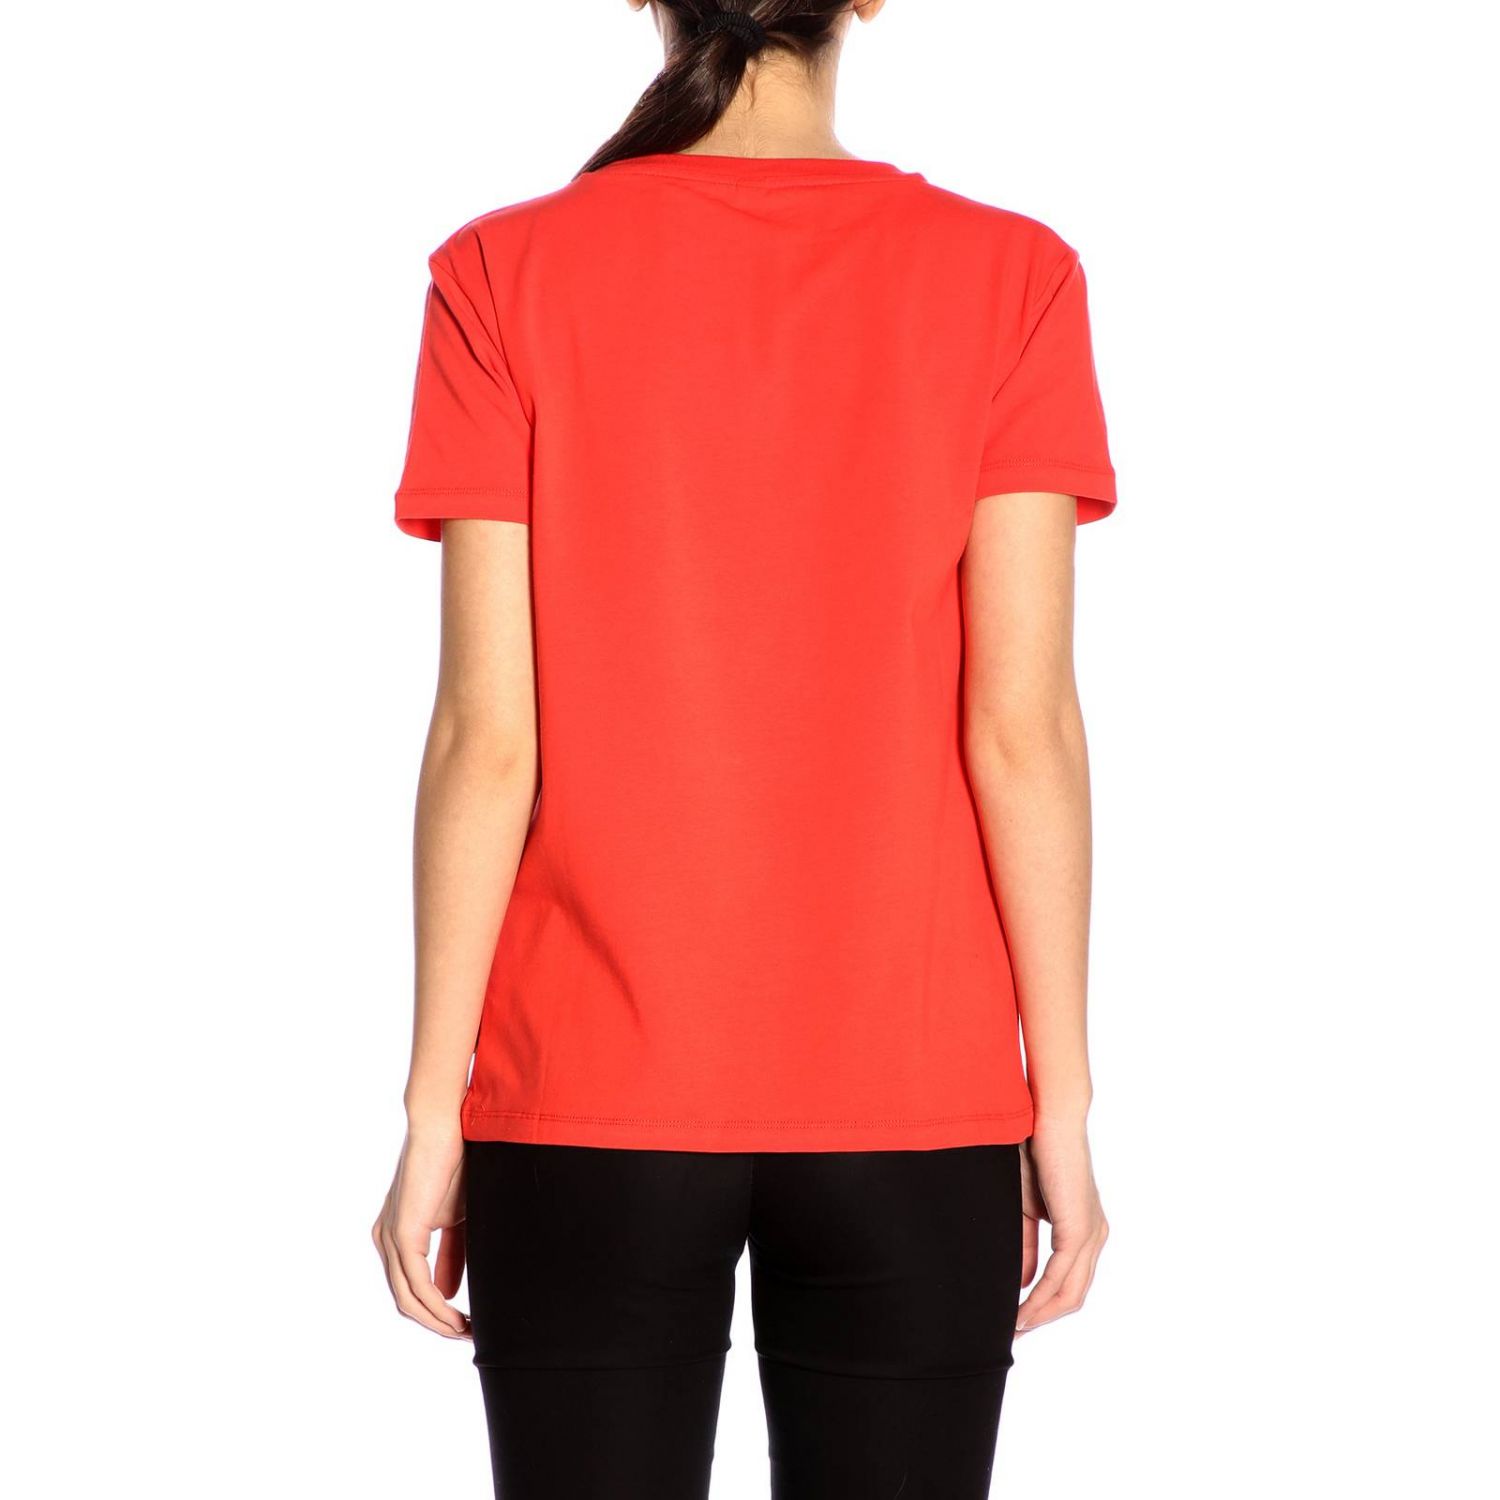 Moschino Outlet T Shirt Women Underbear Red T Shirt Moschino A1903 9003 Giglio